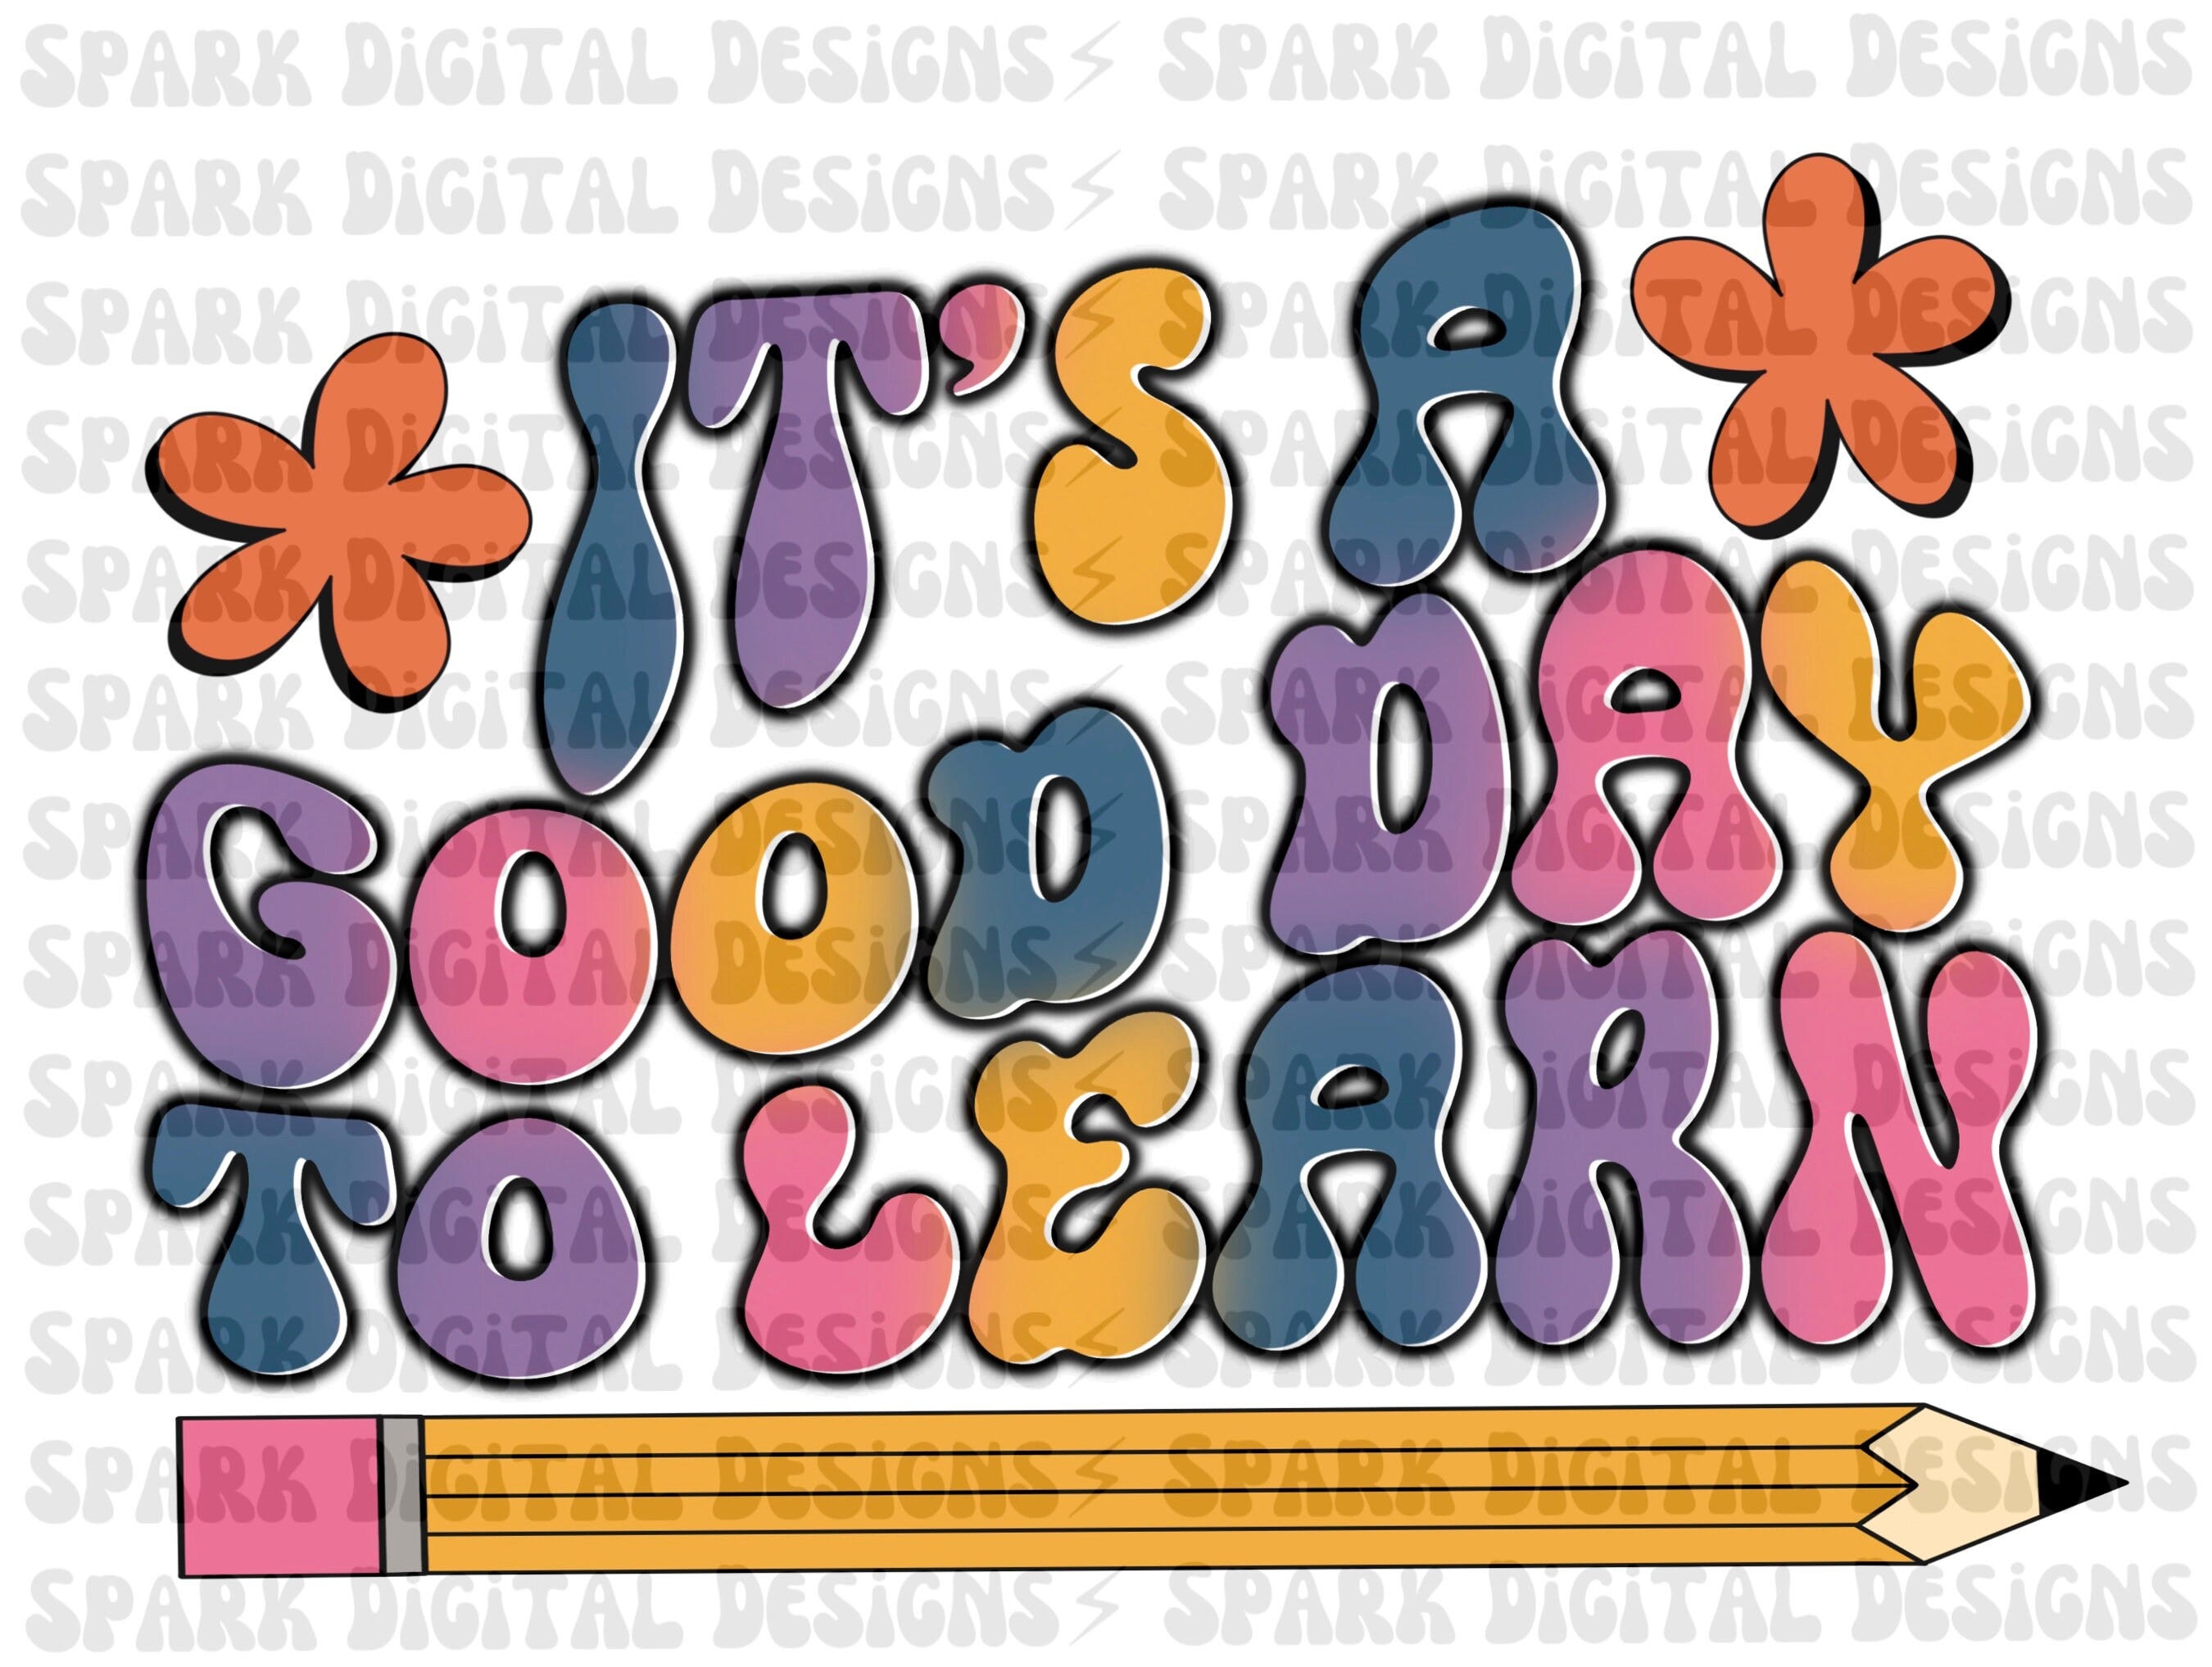 It’s A Good Day to Learn png, Teacher png, Back to School png, School png, Teacher Sublimation, Sublimation Design Downloads, Sublimation